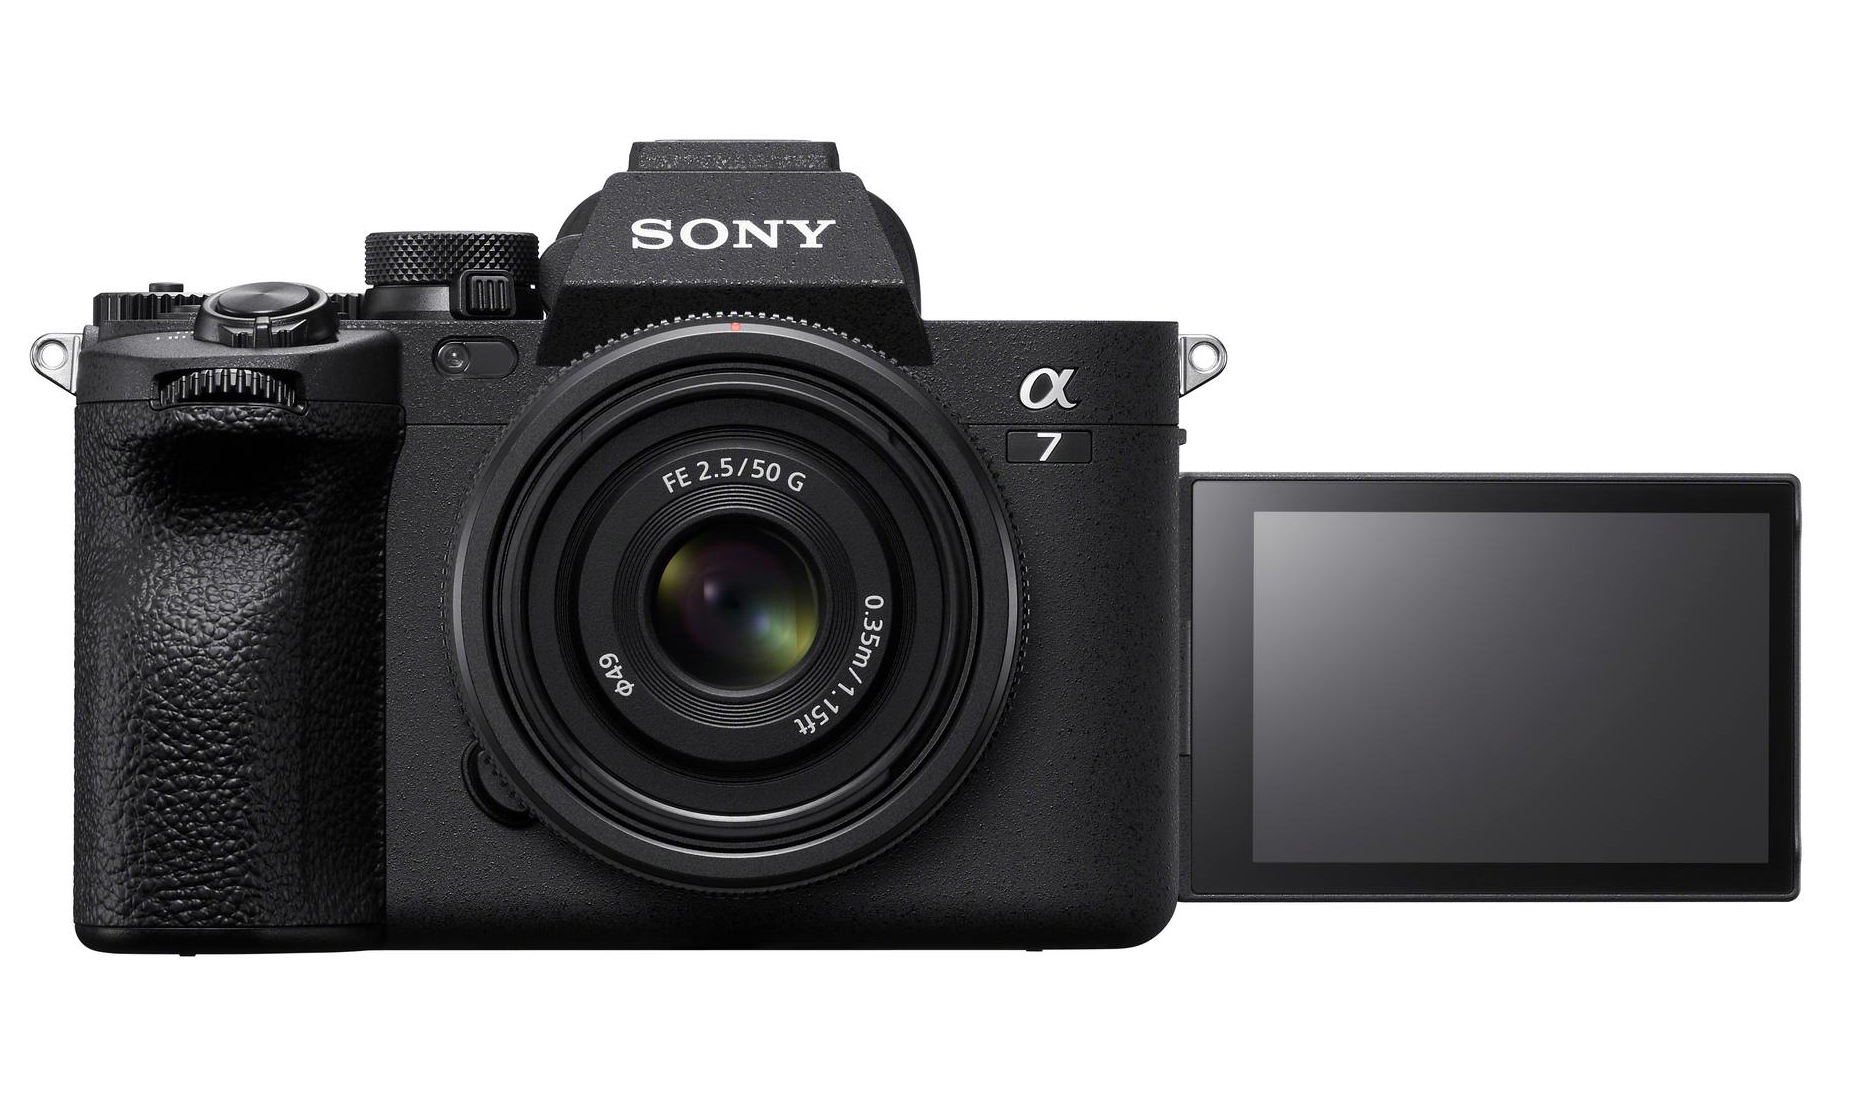 Sony’s A7 IV digicam arrives with a 33-megapixel sensor and 4K 60p video